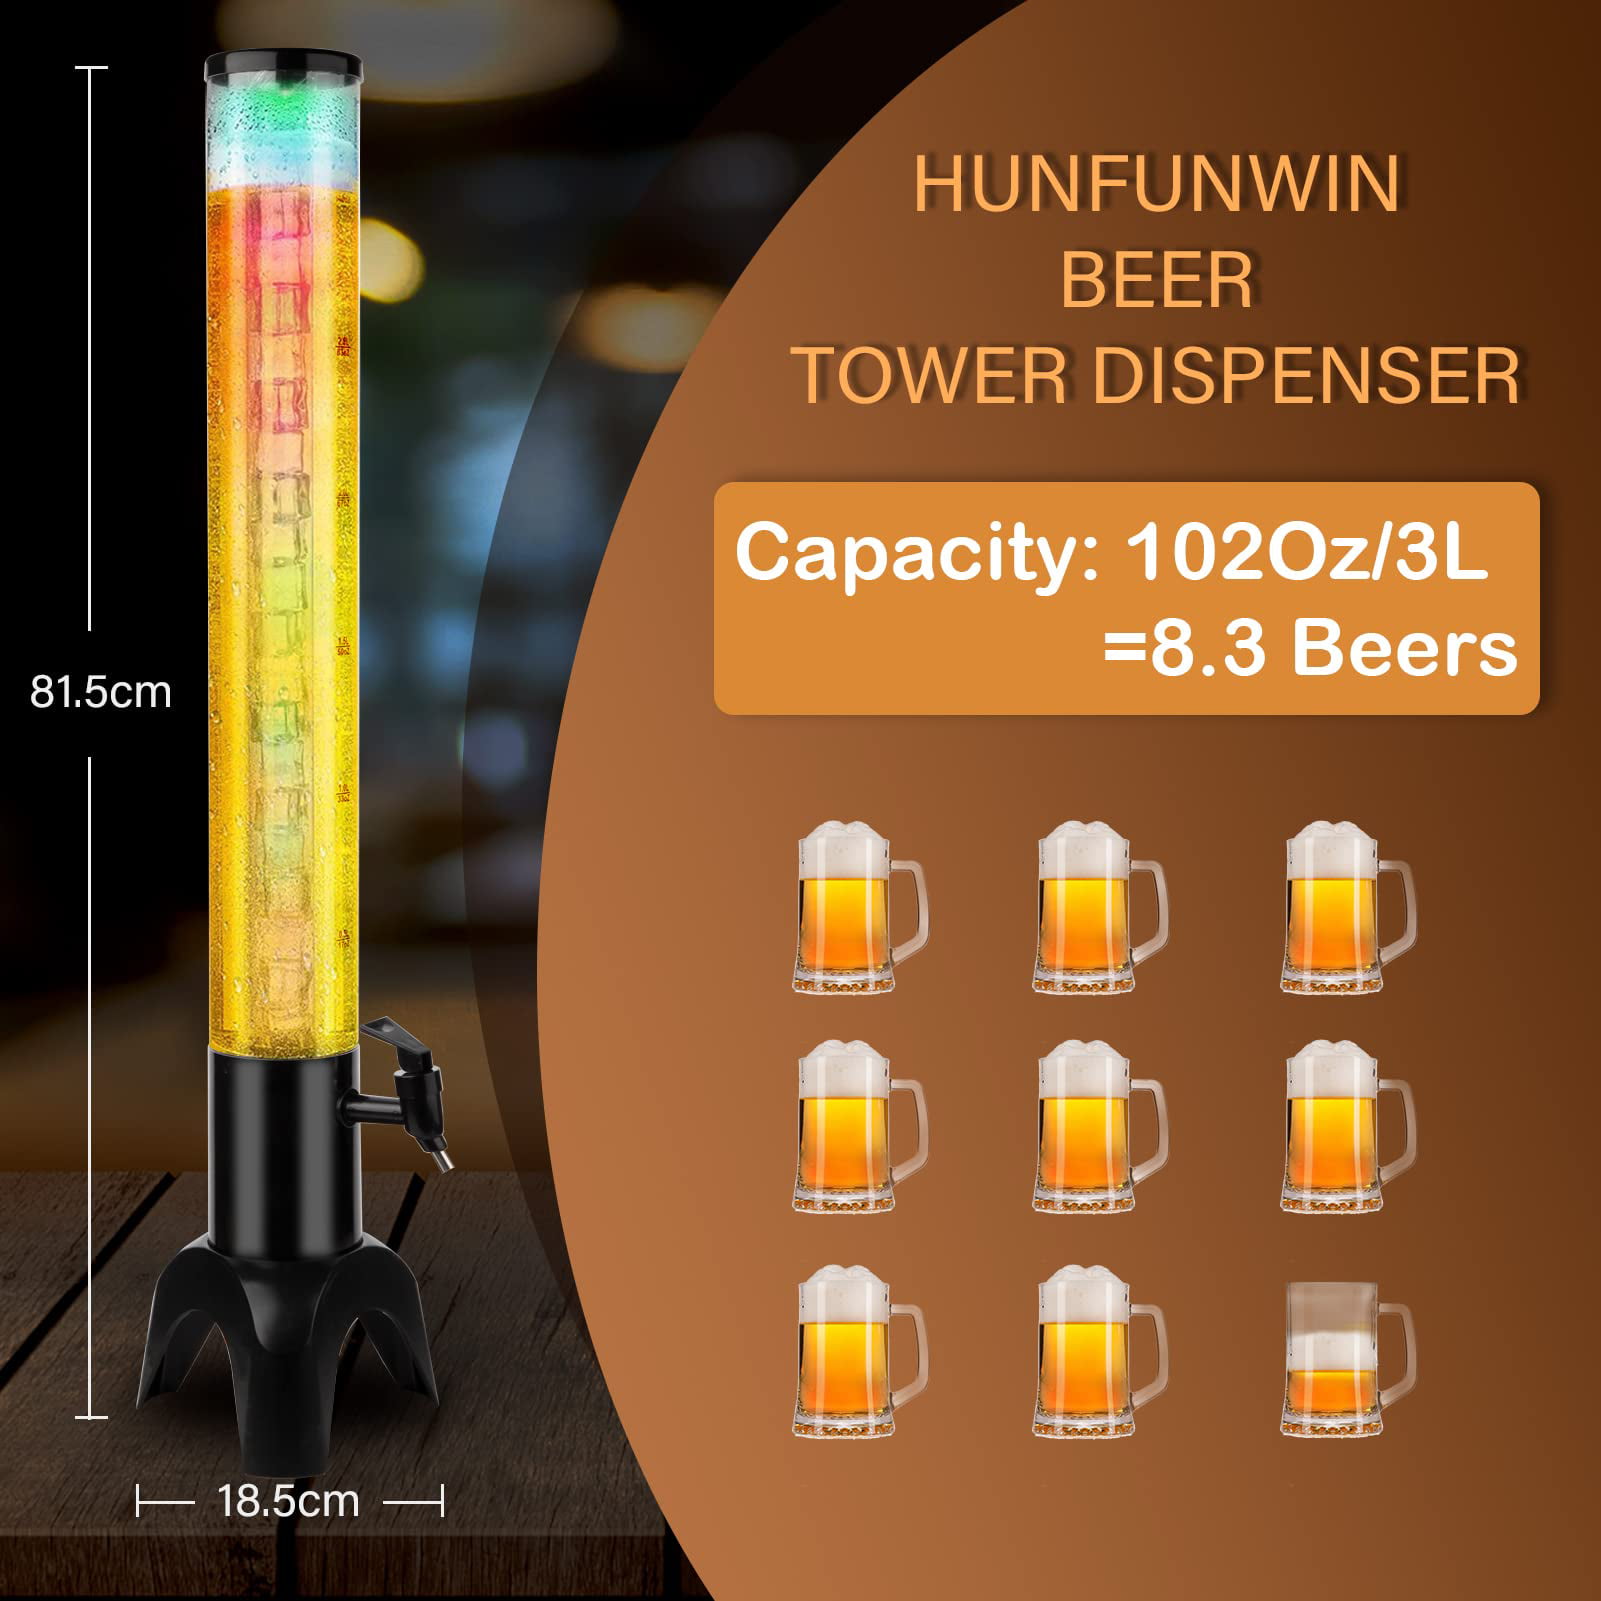 OGGI Beer Tower 3L/100oz - Beverage Dispenser with Spigot &  Ice Tube, Margarita Tower, Mimosa Tower, Perfect Drink Dispensers for  Parties, Drink Tower, Holds 6 Pints of Beer - Copper